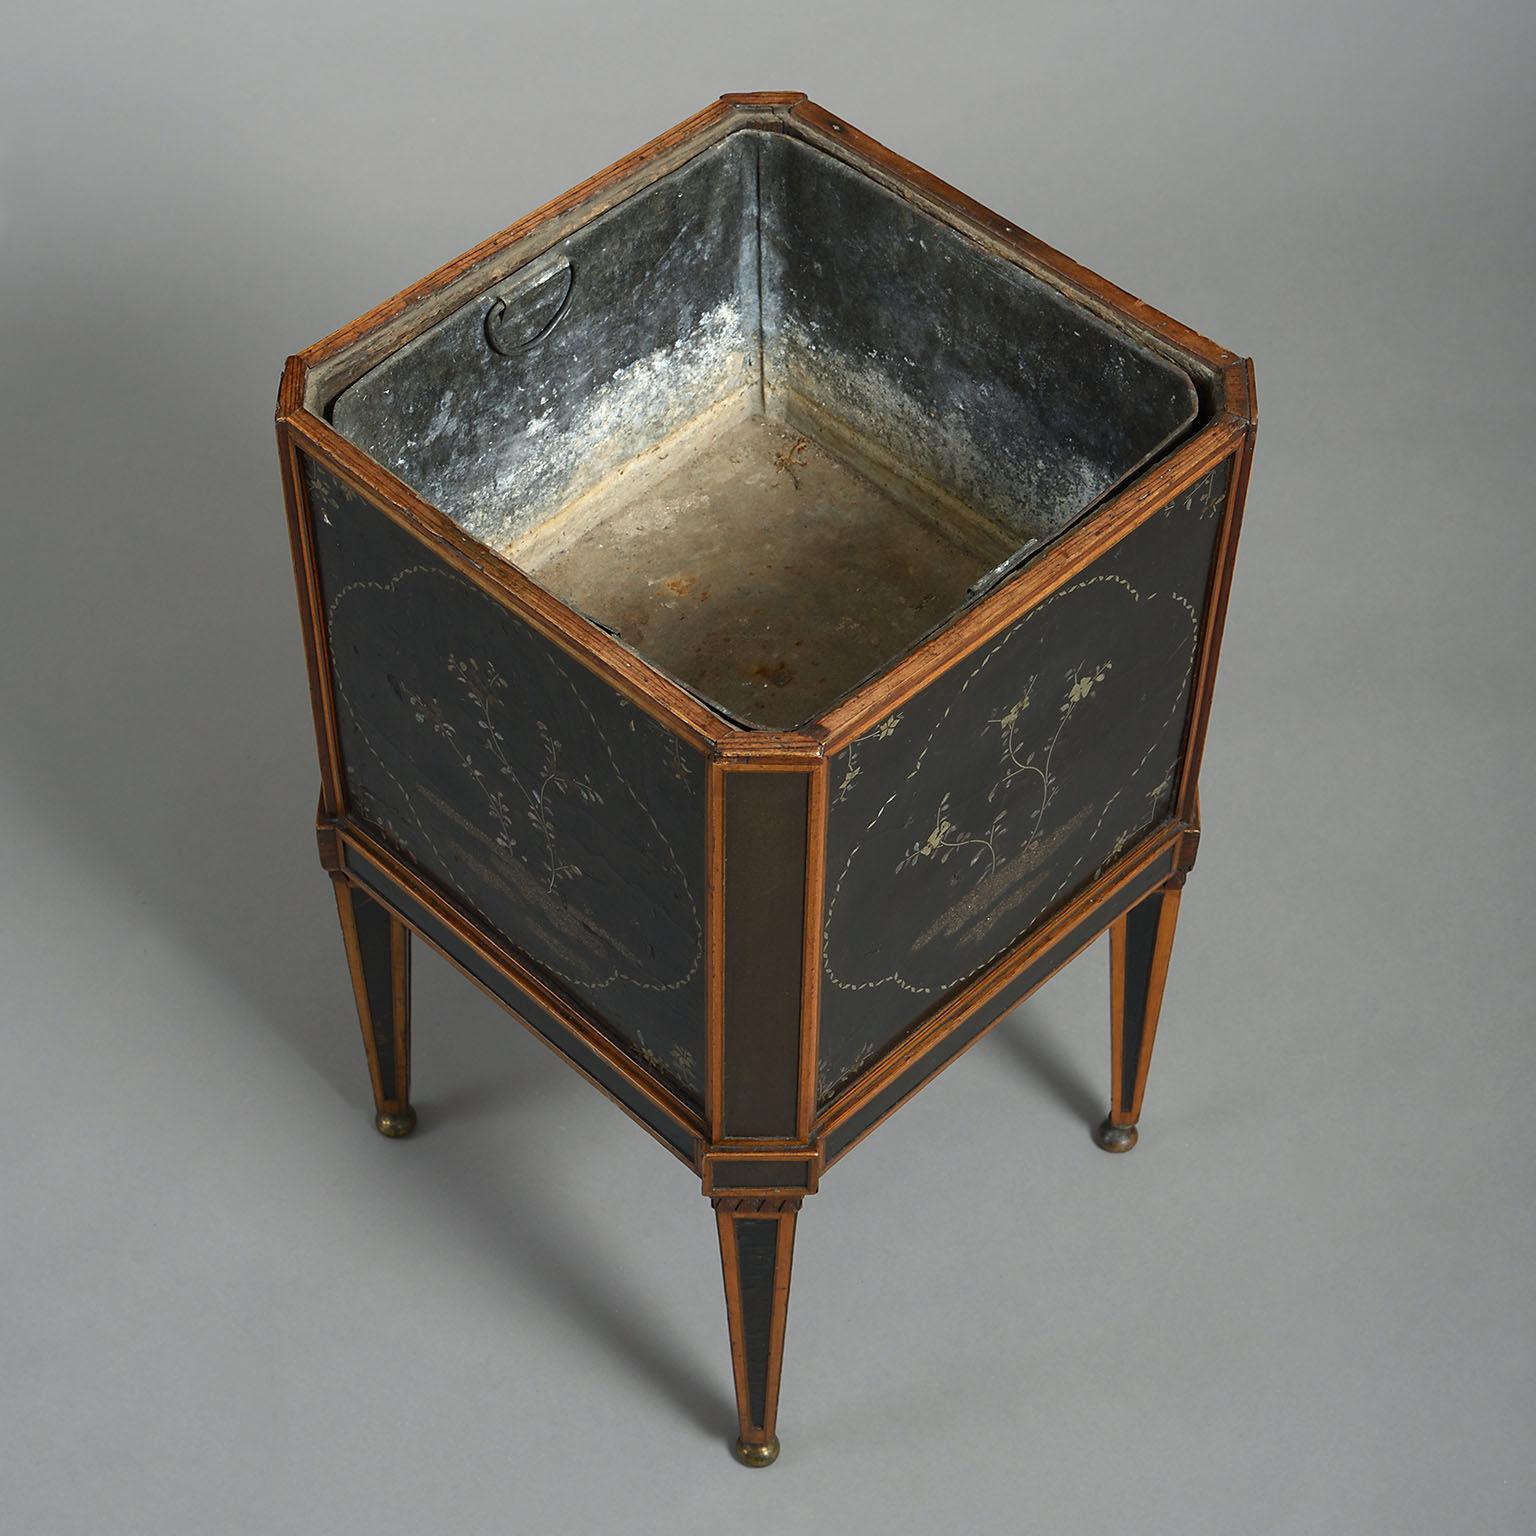 The square form with canted corners, mounted with oriental lacquer panels, probably from a tea-box, and raised on angled square tapering legs, also inset with lacquer panels and standing on brass ball feet.